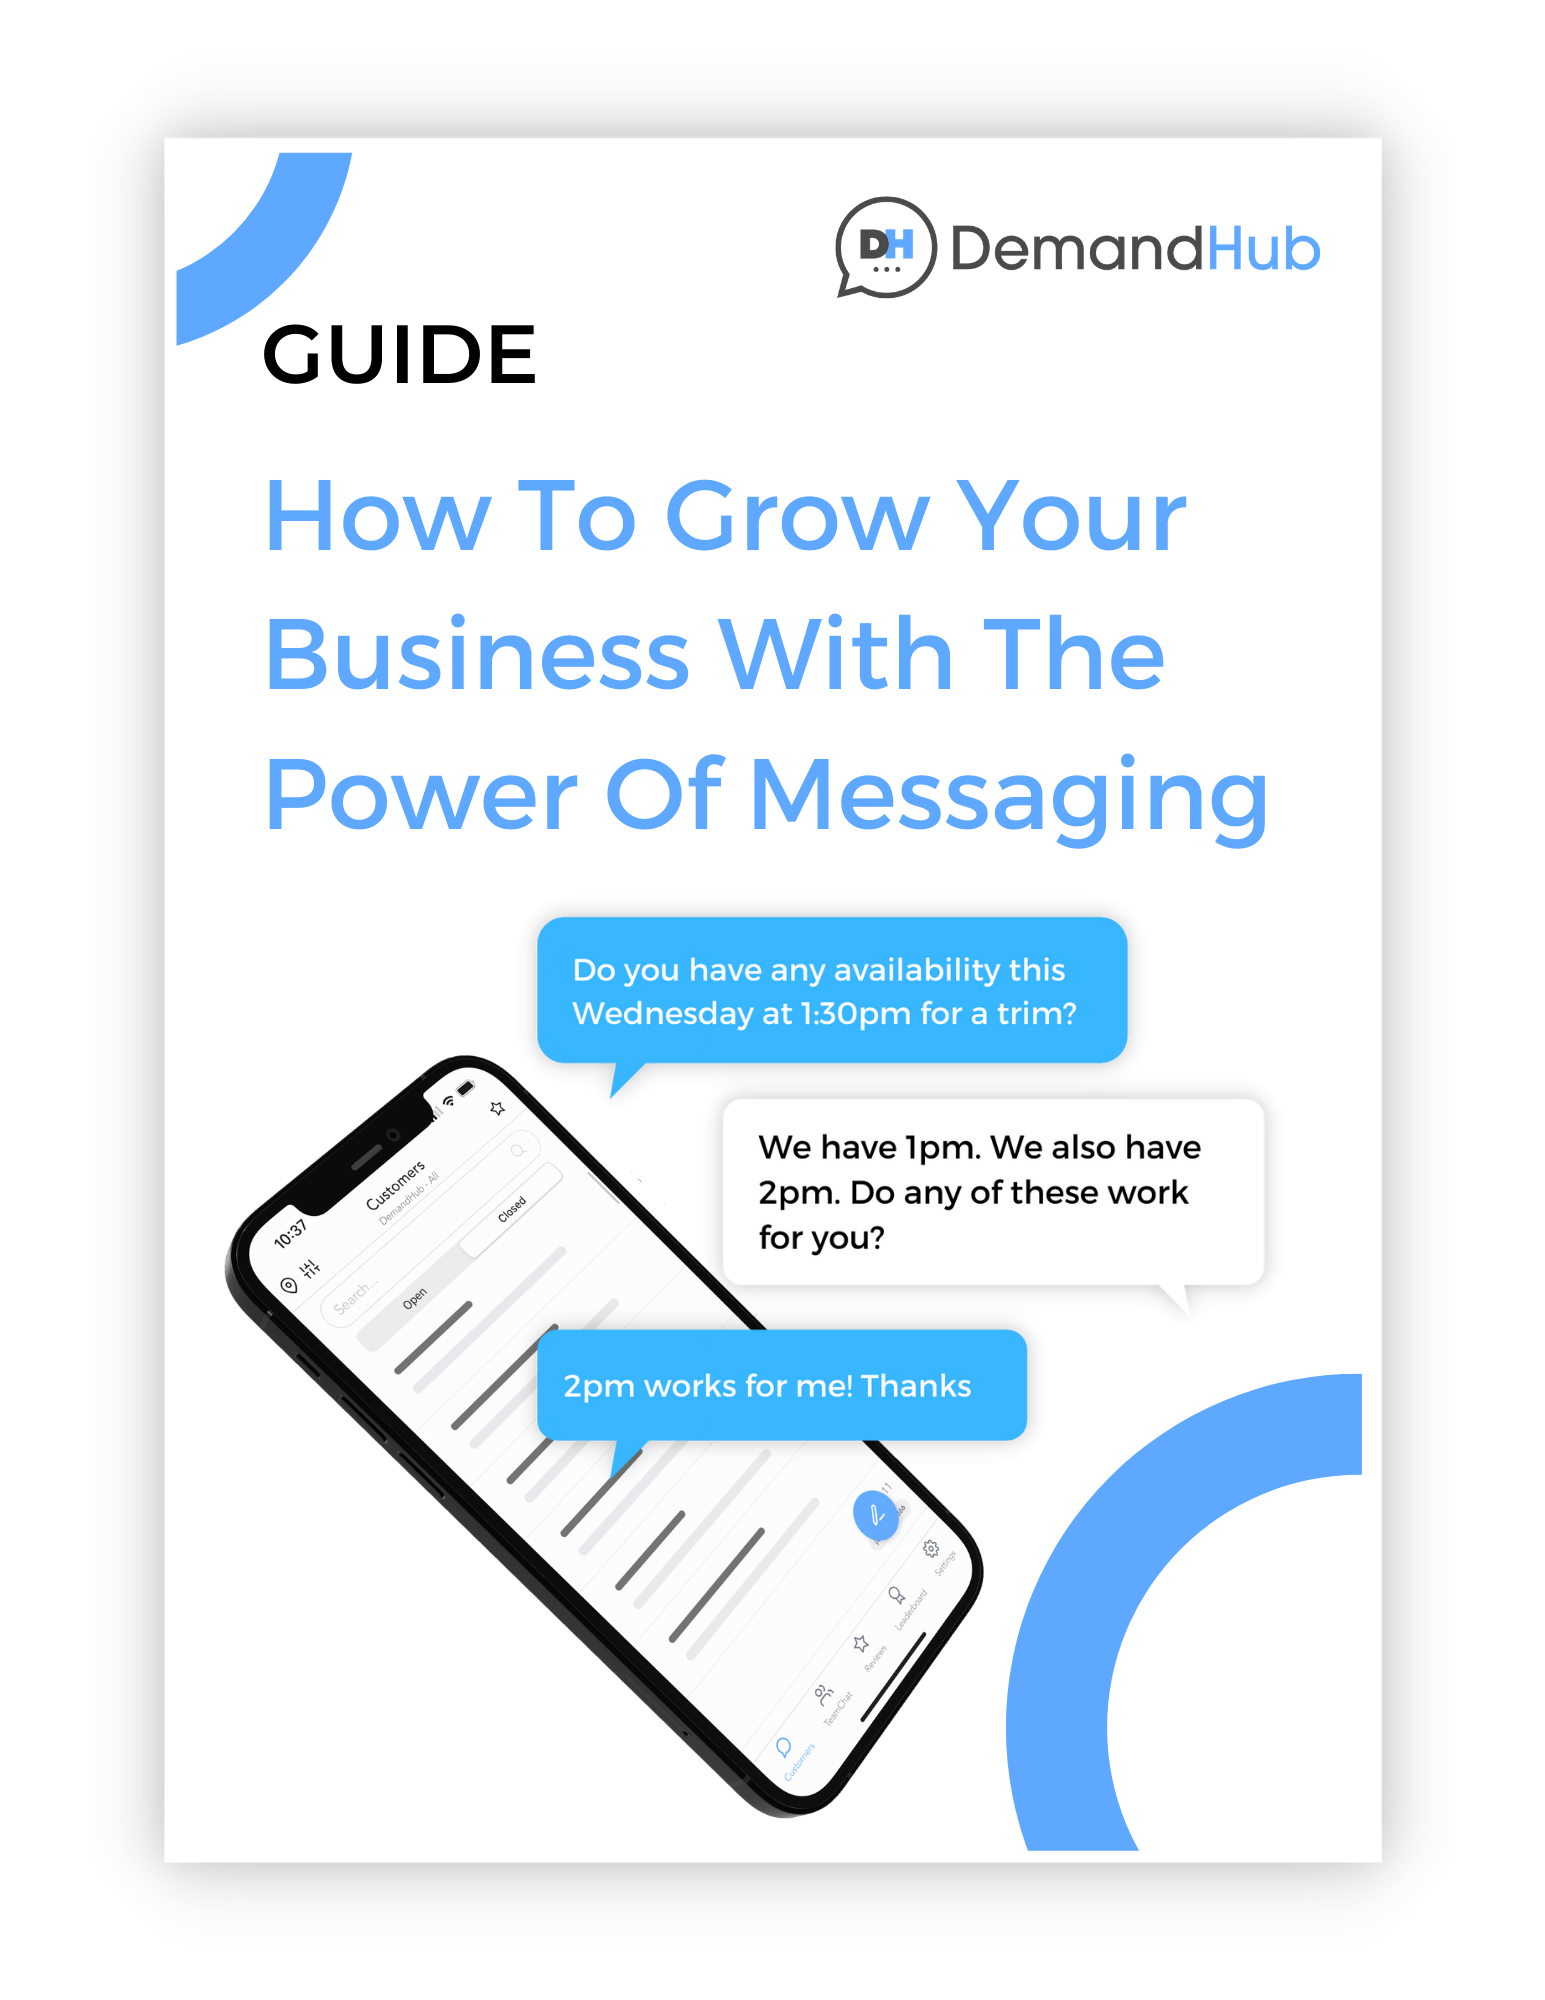 Why messaging your customers will help your business grow